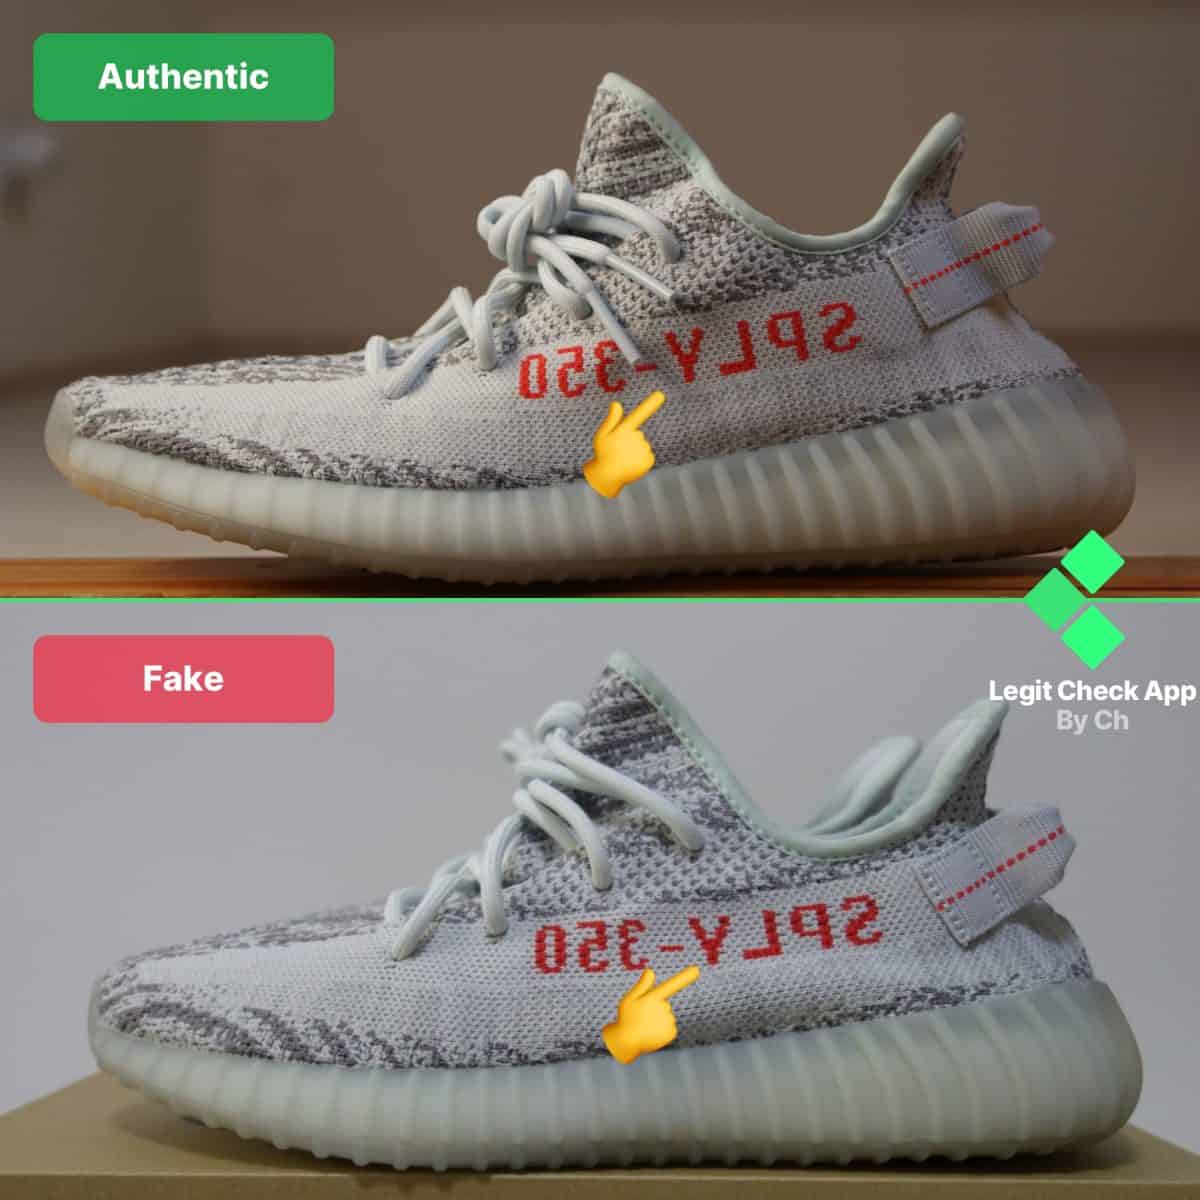 Letter Spacing Blue tint Yeezy Boost 350 V2